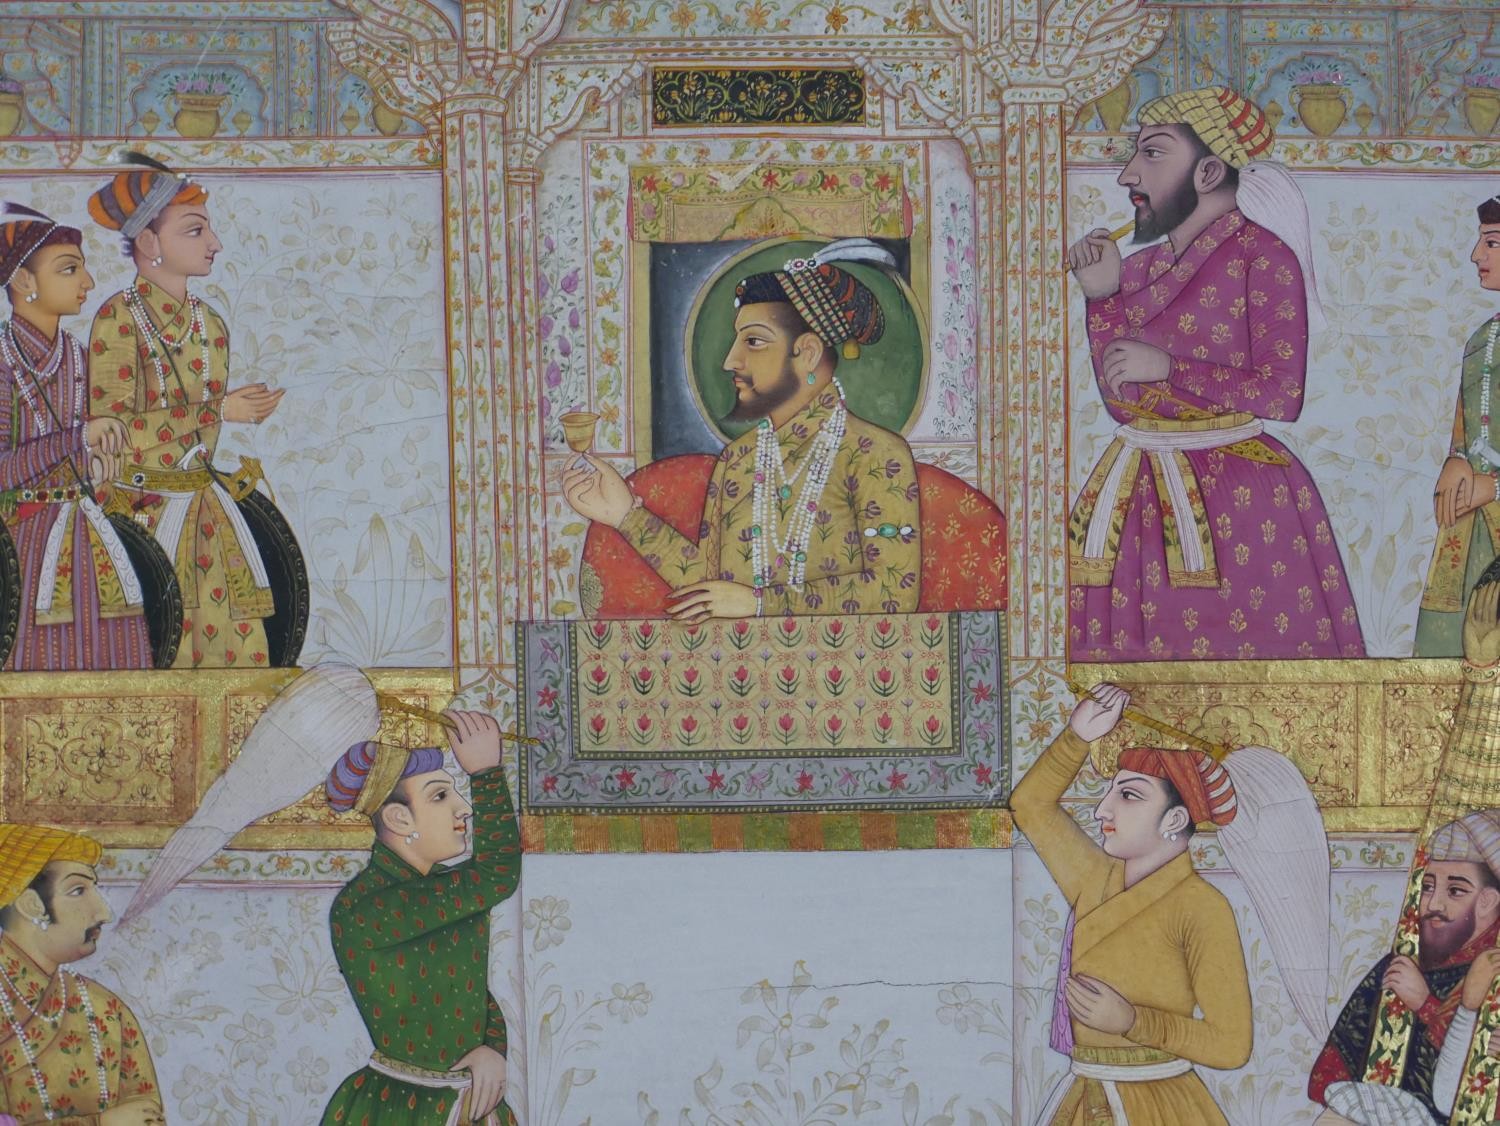 Mougal School, Europeans bring gifts to Shah Jahan, mixed media on paper, framed H.75 W.58.5cm - Image 4 of 7